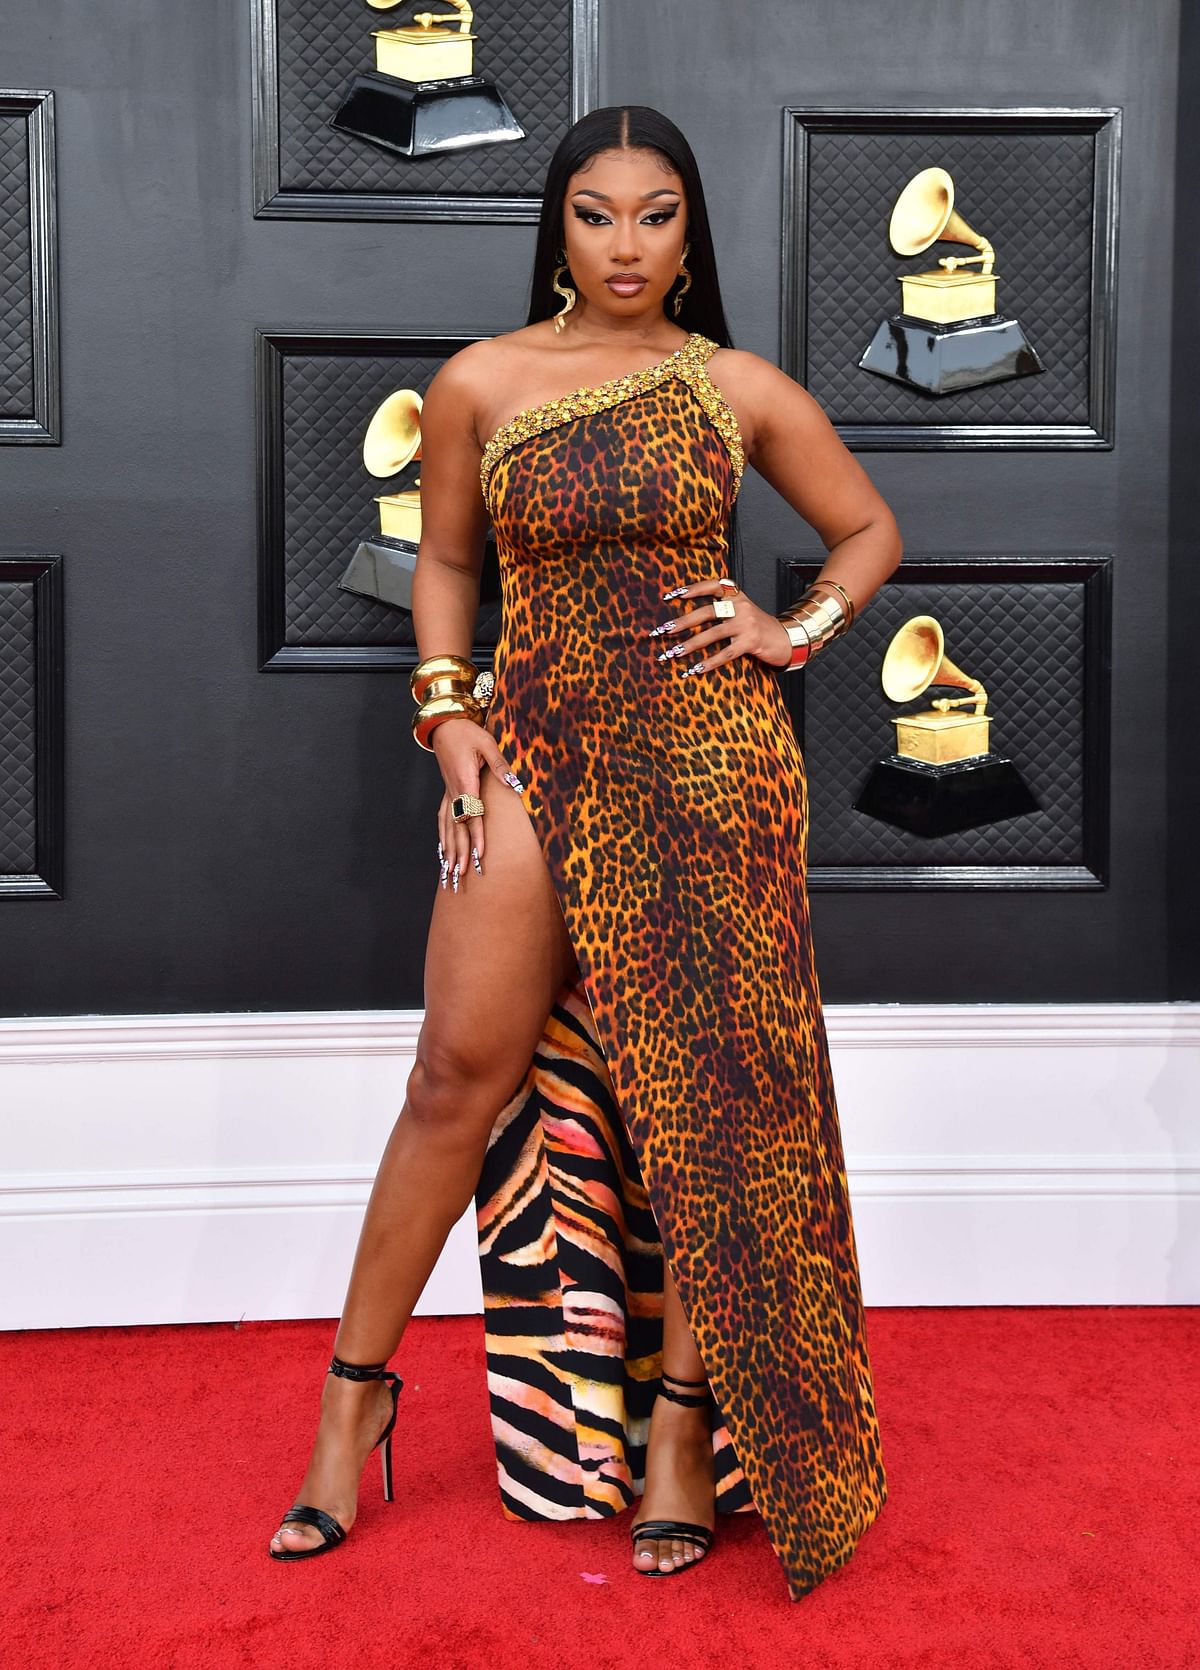 Megan Thee Stallion wore a leopard print one-shoulder gown with a high leg slit. Credit: AFP Photo